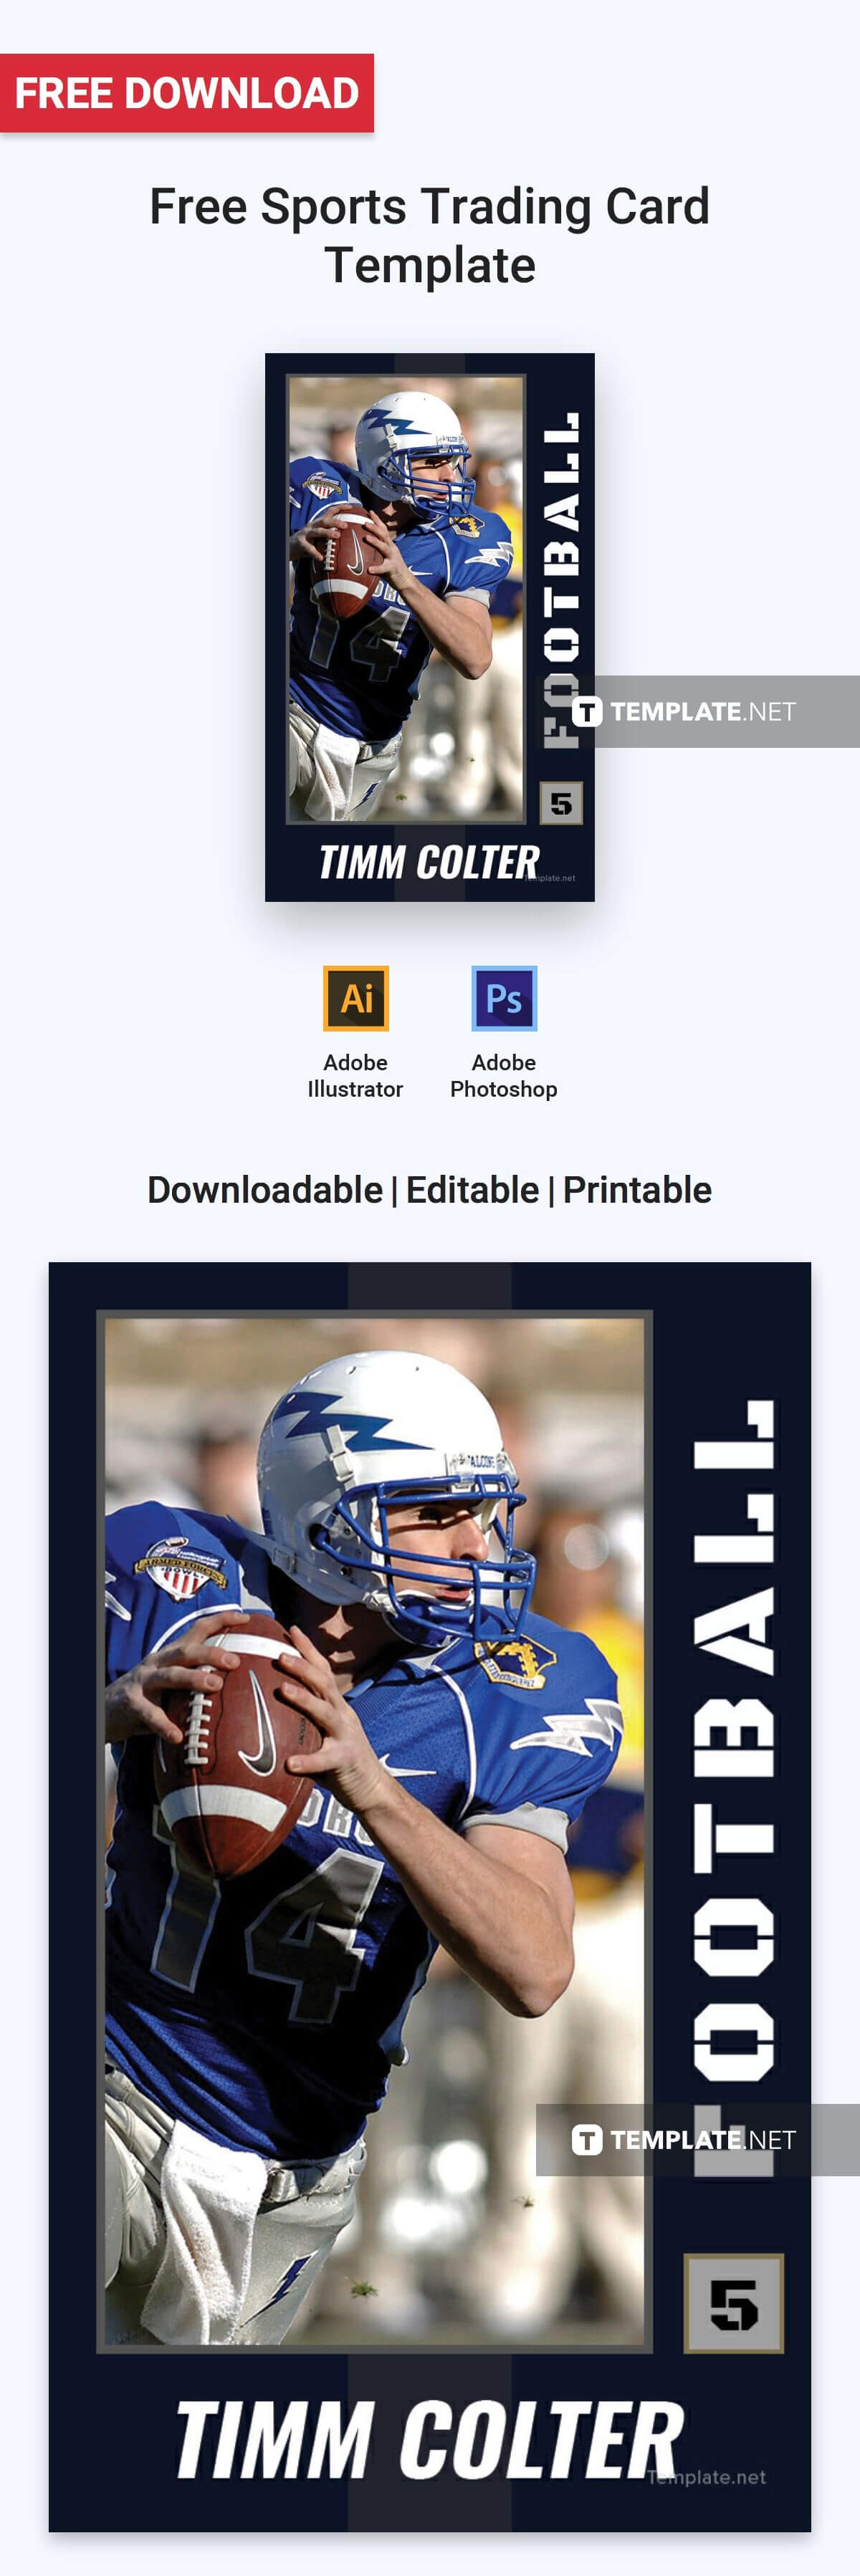 Free Sports Trading Card | Card Templates & Designs 2019 In Throughout Free Sports Card Template